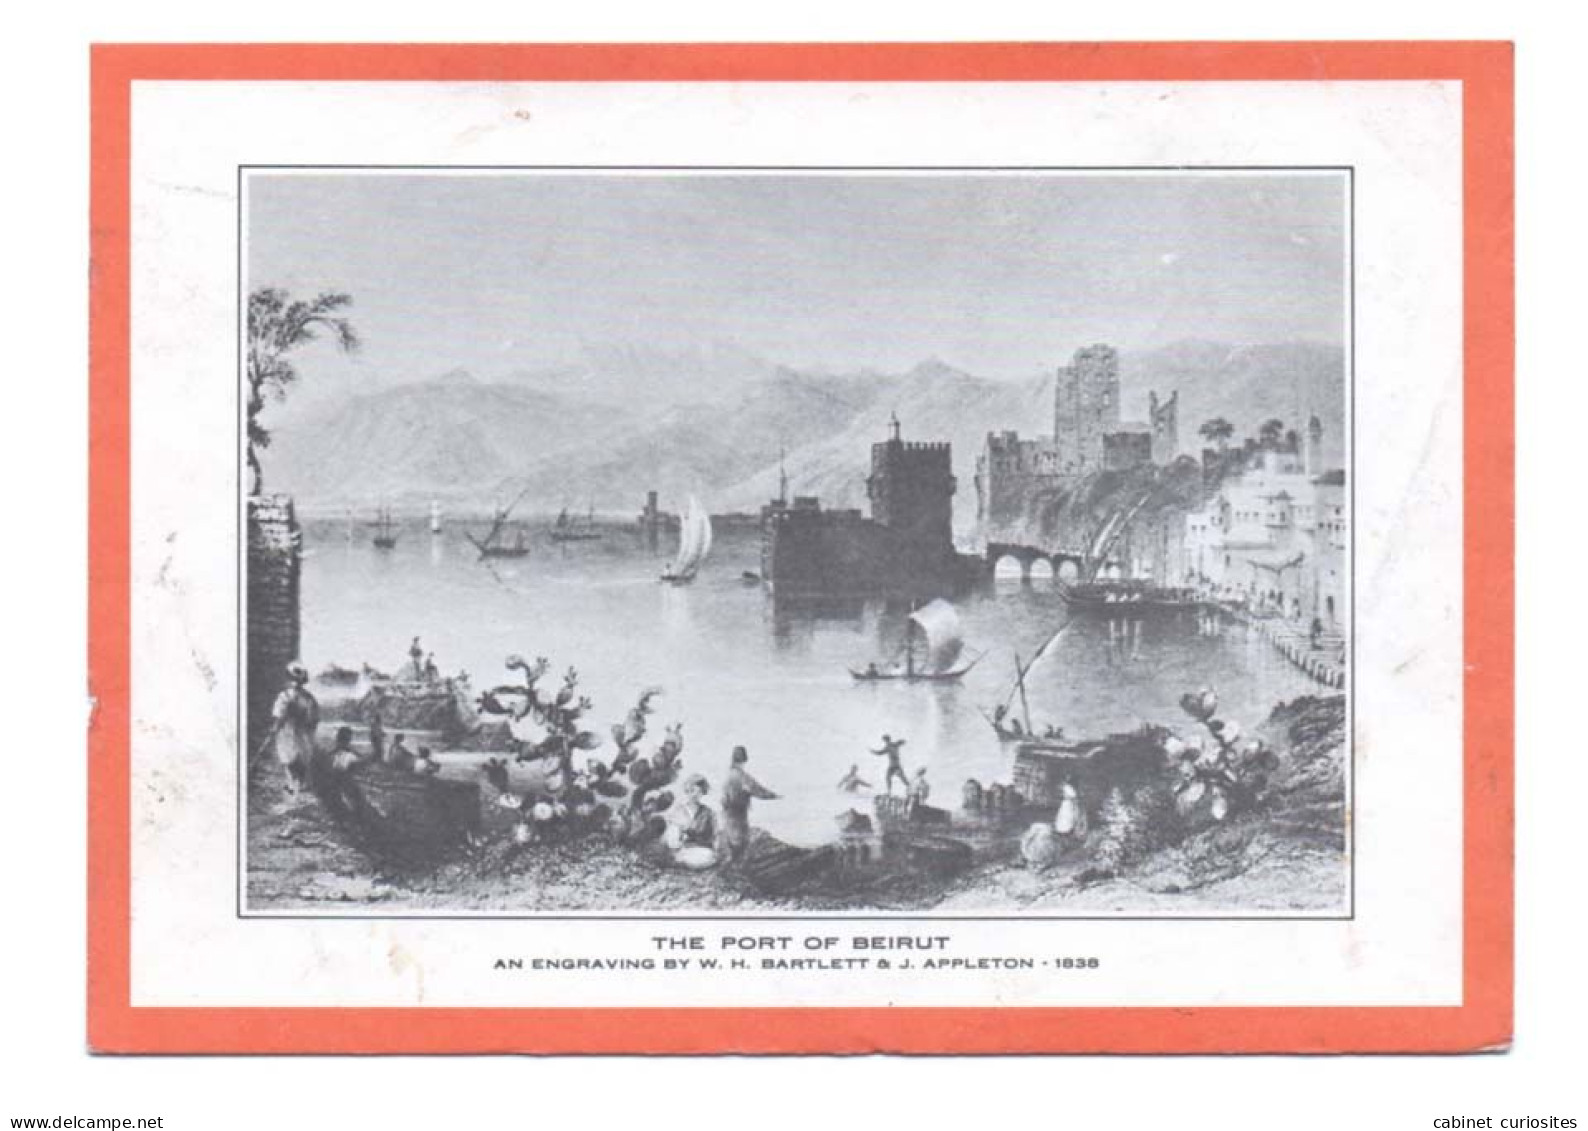 THE PORT OF BEIRUT - Art Engraving By W. H. Bartlett & J. Appletown In 1838 - Le Port De Beyrouth - Liban - Liban